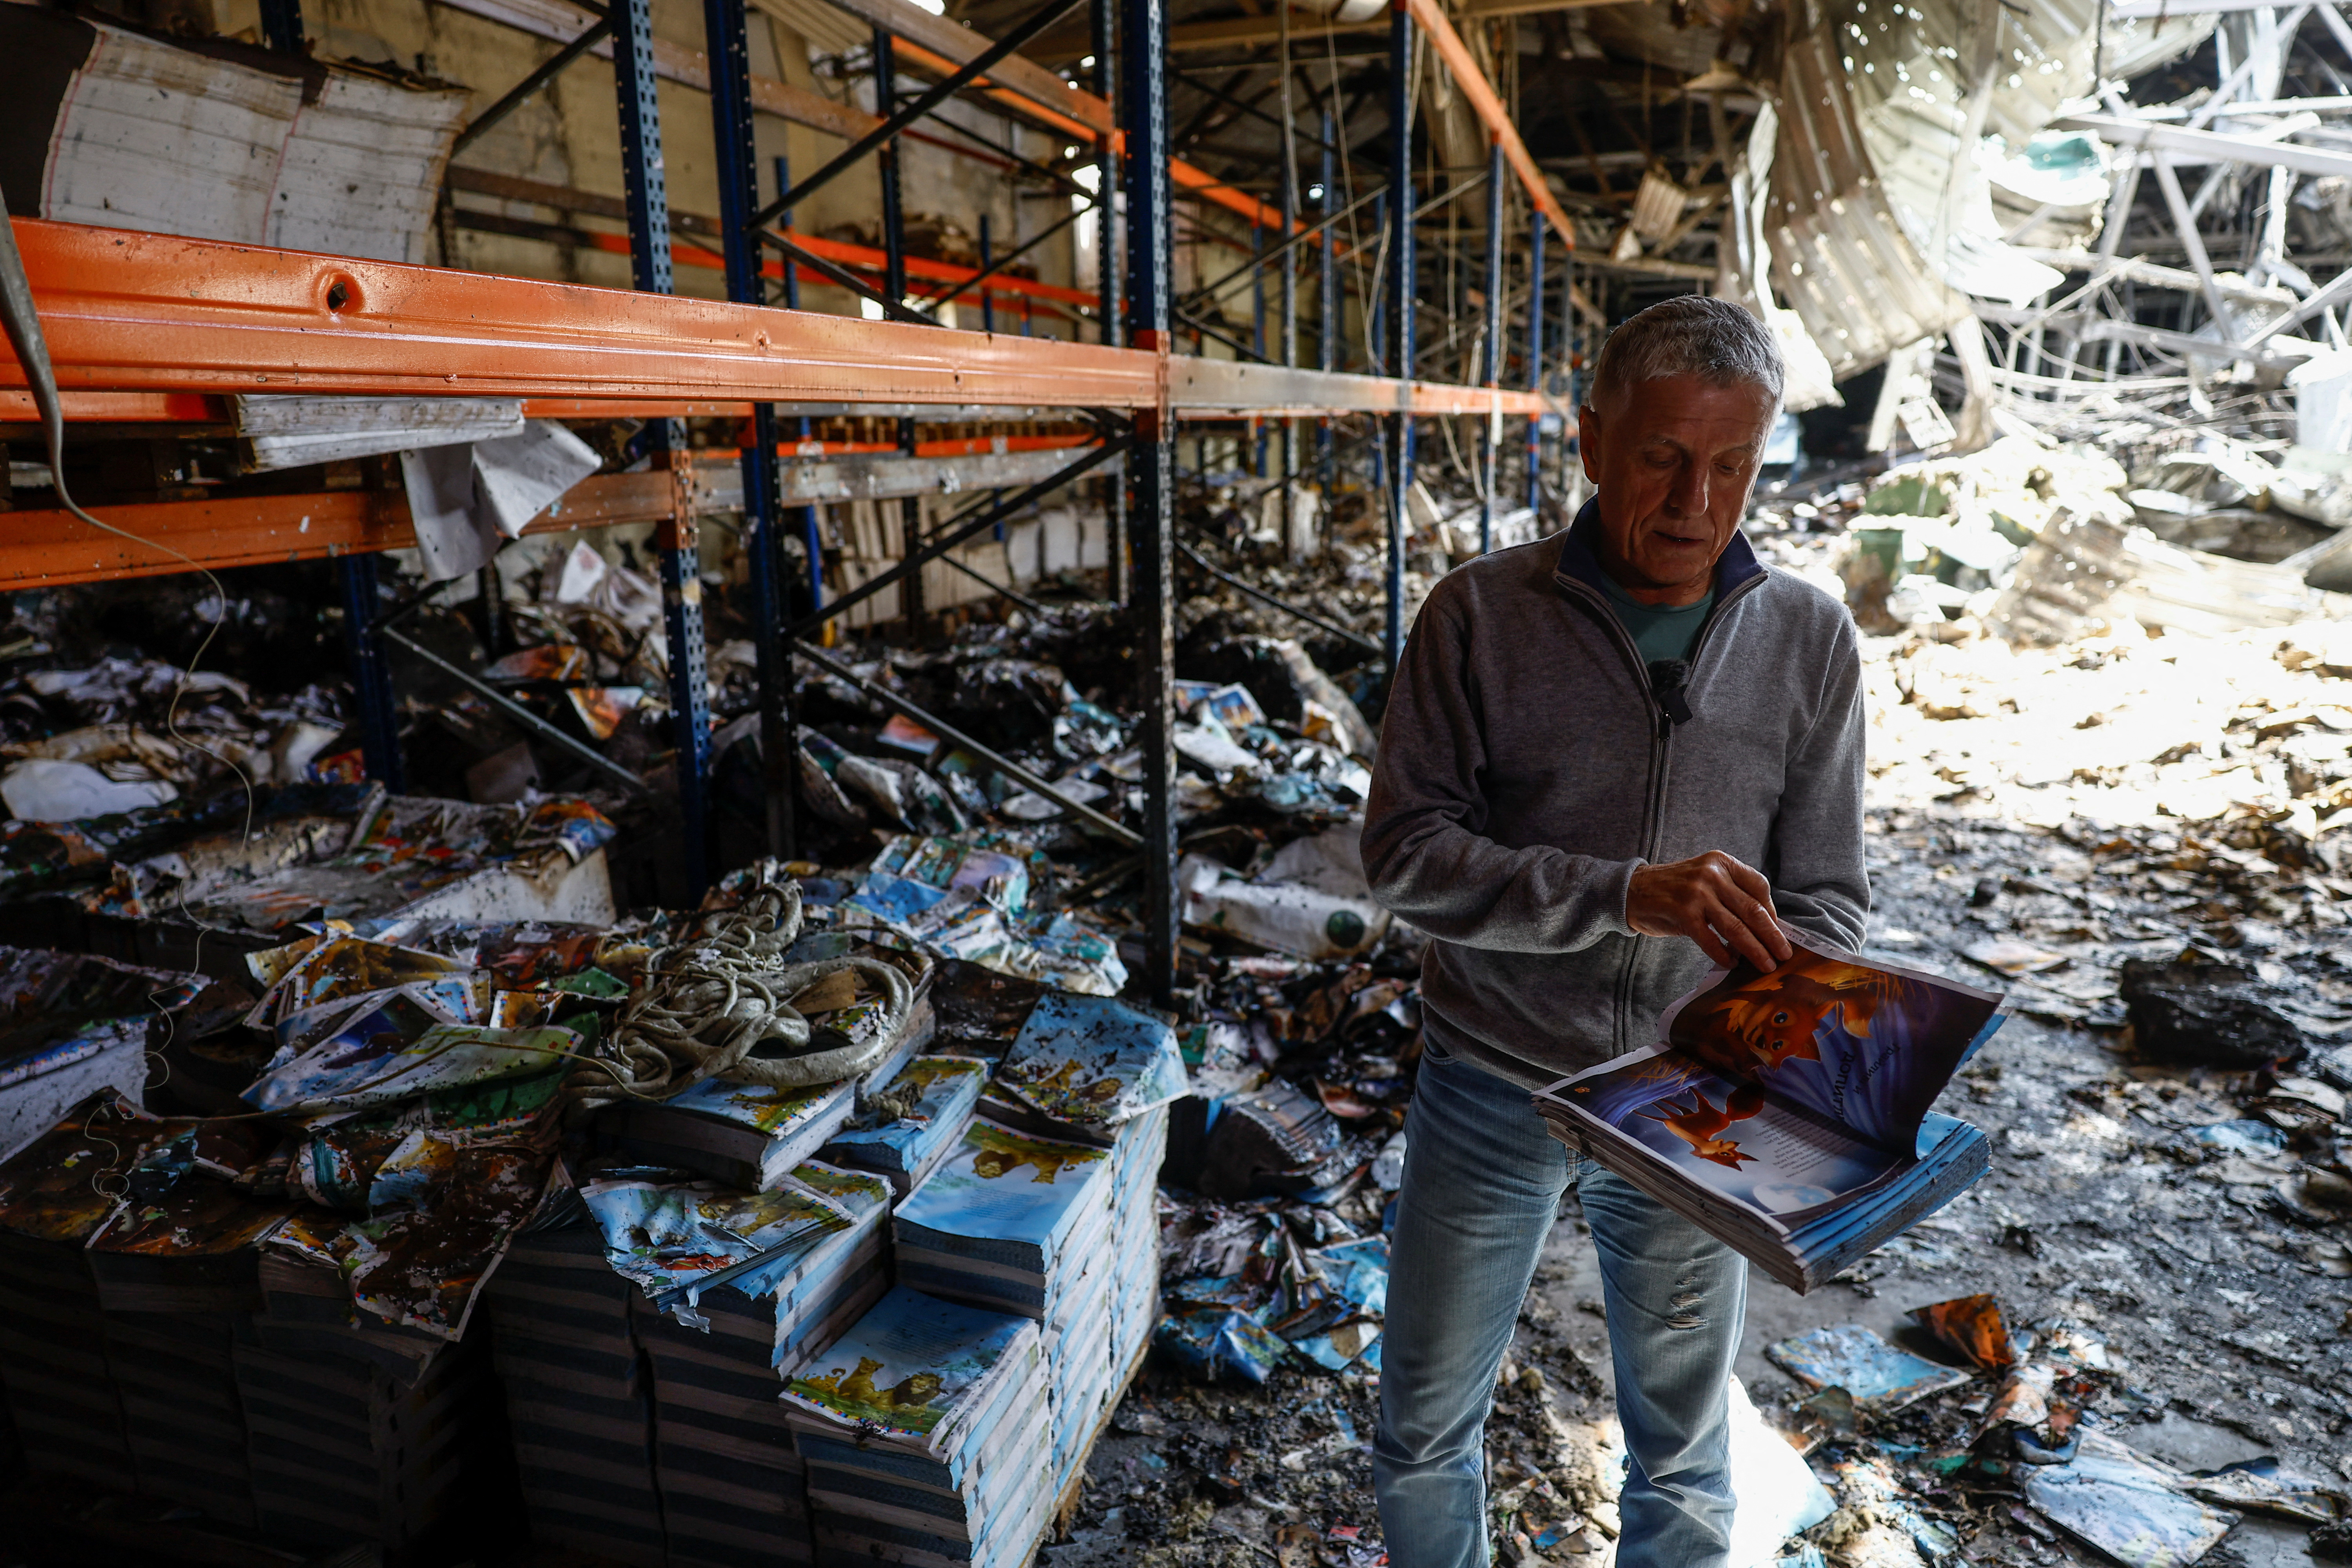 Sergii Polituchyi, Ukrainian publisher and businessman, shows an example of a book for kids inside of his printing house, which was heavily damaged by a recent Russian missile strike, in Kharkiv